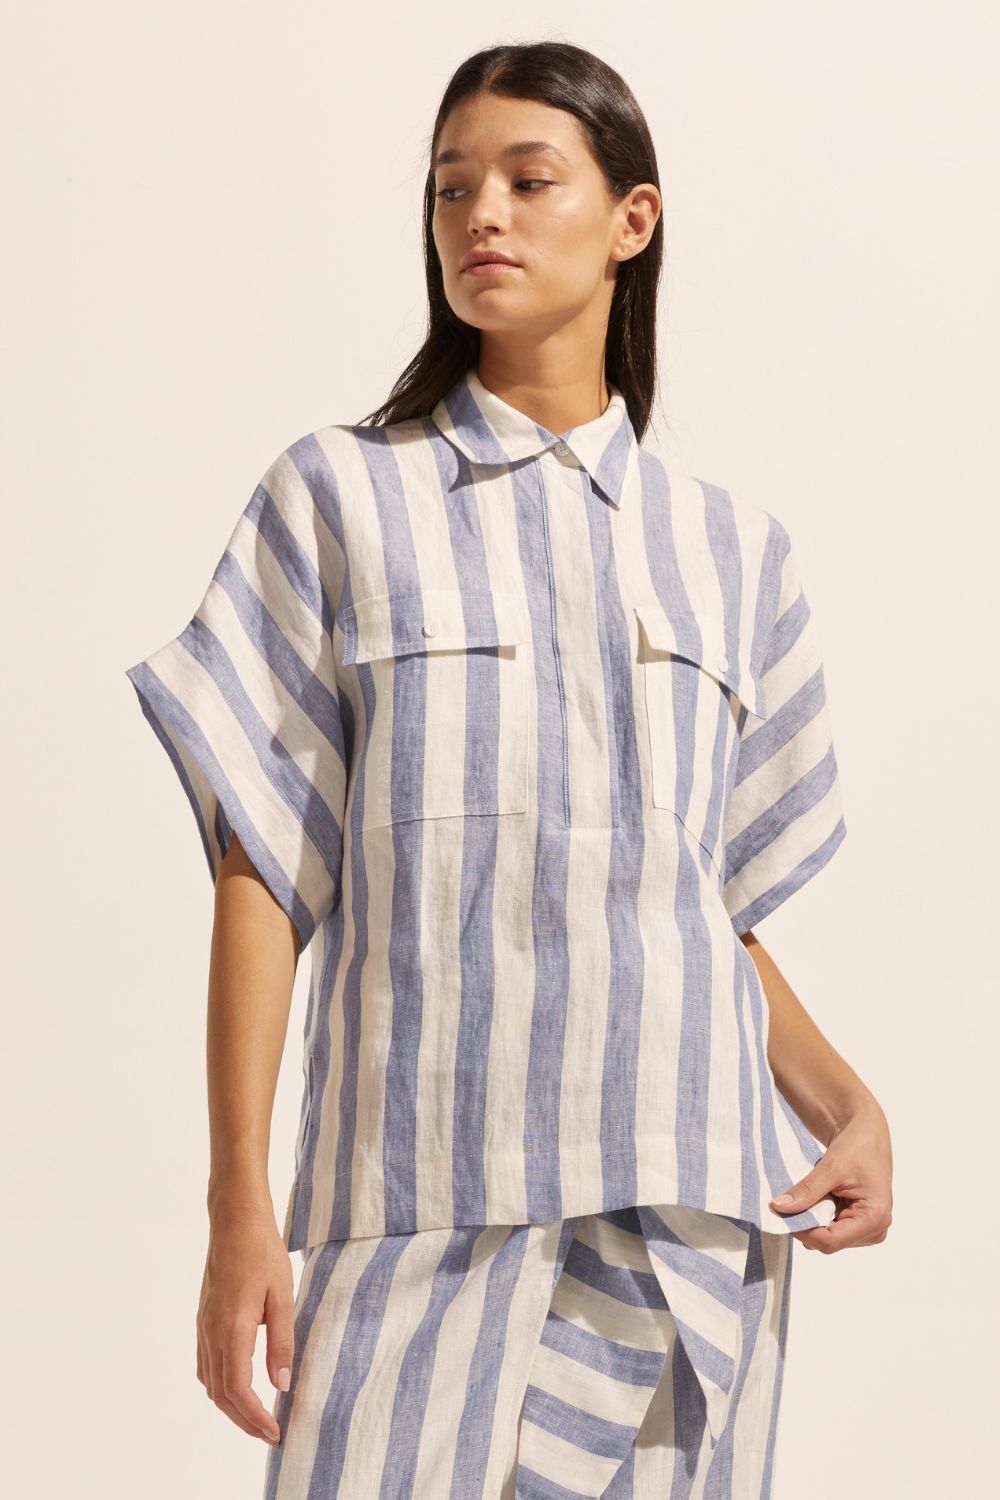 blue and white stripe, shirt, oversized pockets, short sleeve, linen, front view